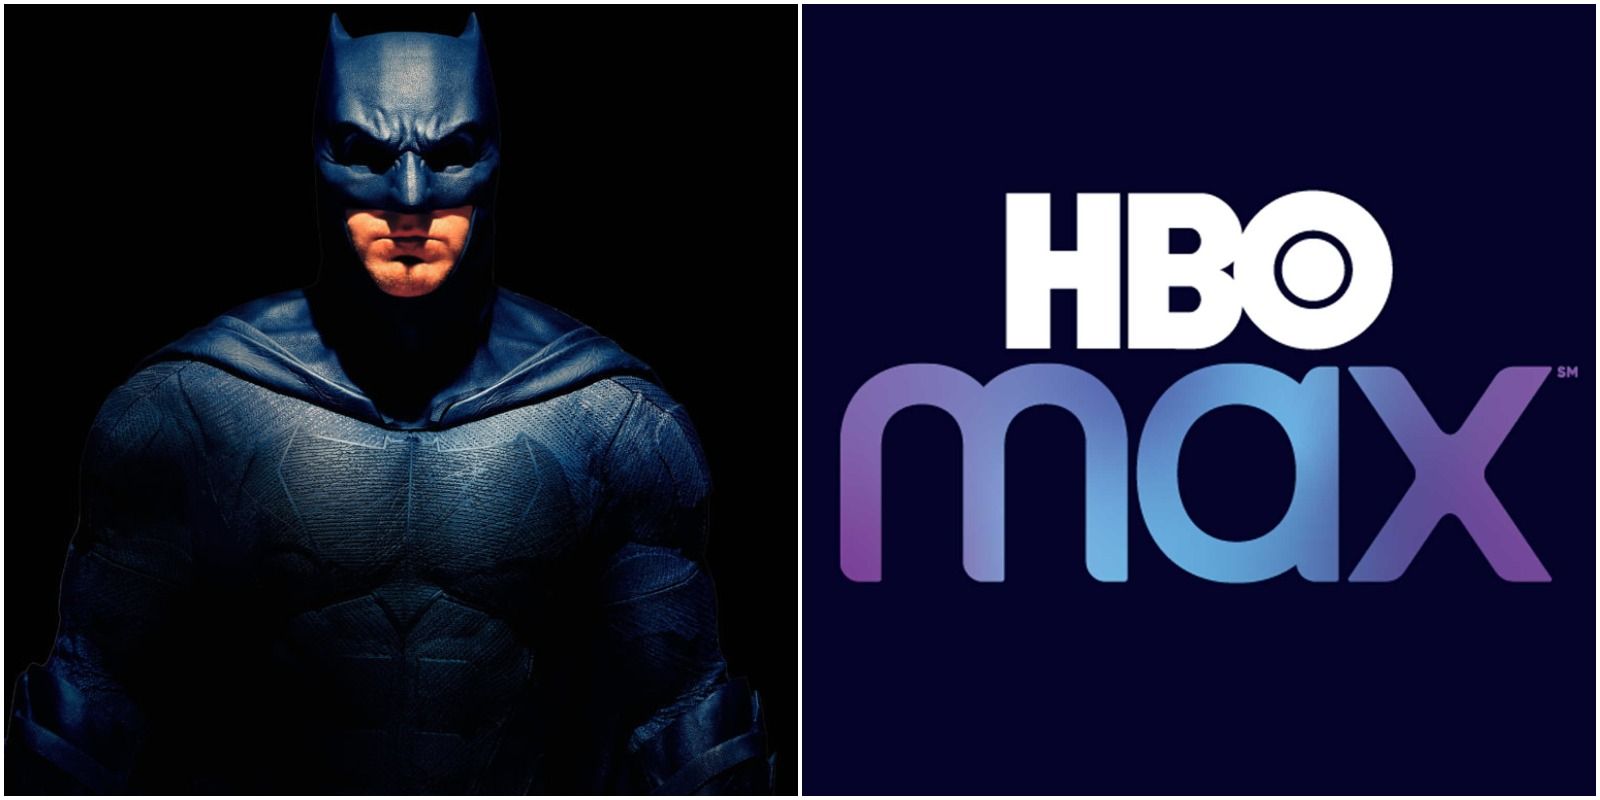 Ben Affleck's Batman and HBO's new streaming service, HBO Max